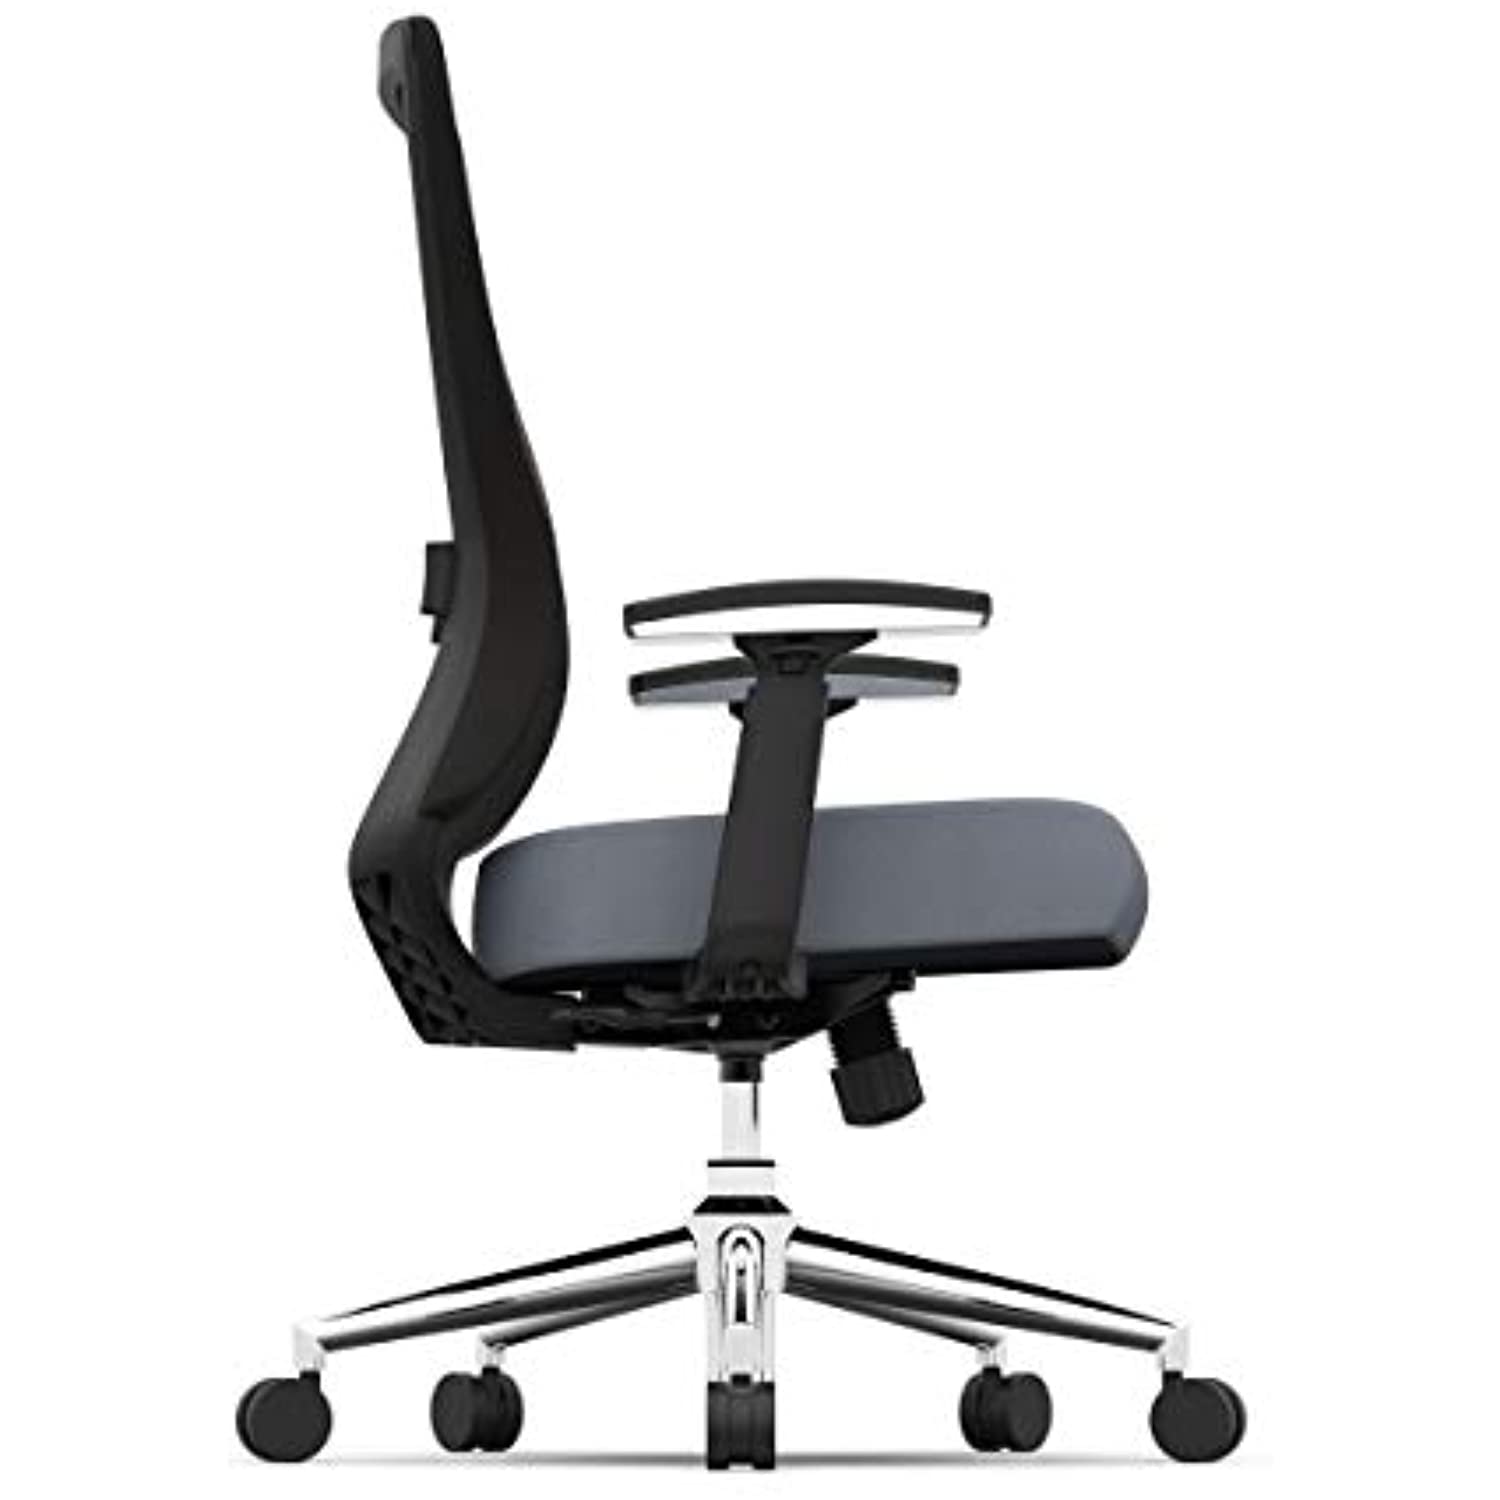 Realspace Levari Faux Leather Mid-Back Task Chair, Gray/Black - image 8 of 8